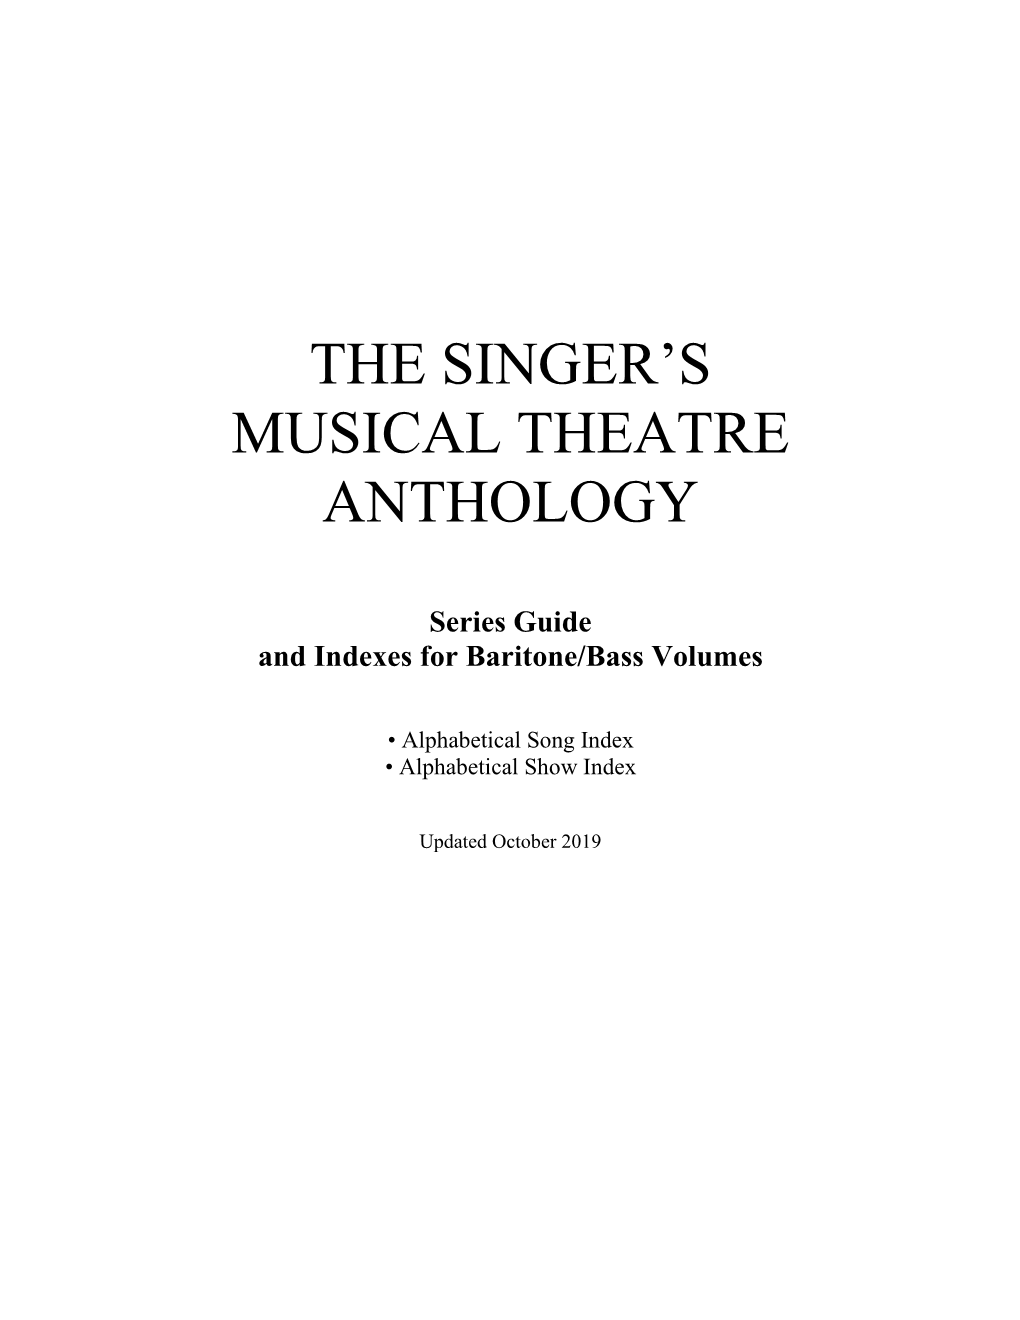 THE SINGER's MUSICAL THEATRE ANTHOLOGY Baritone/Bass Volumes